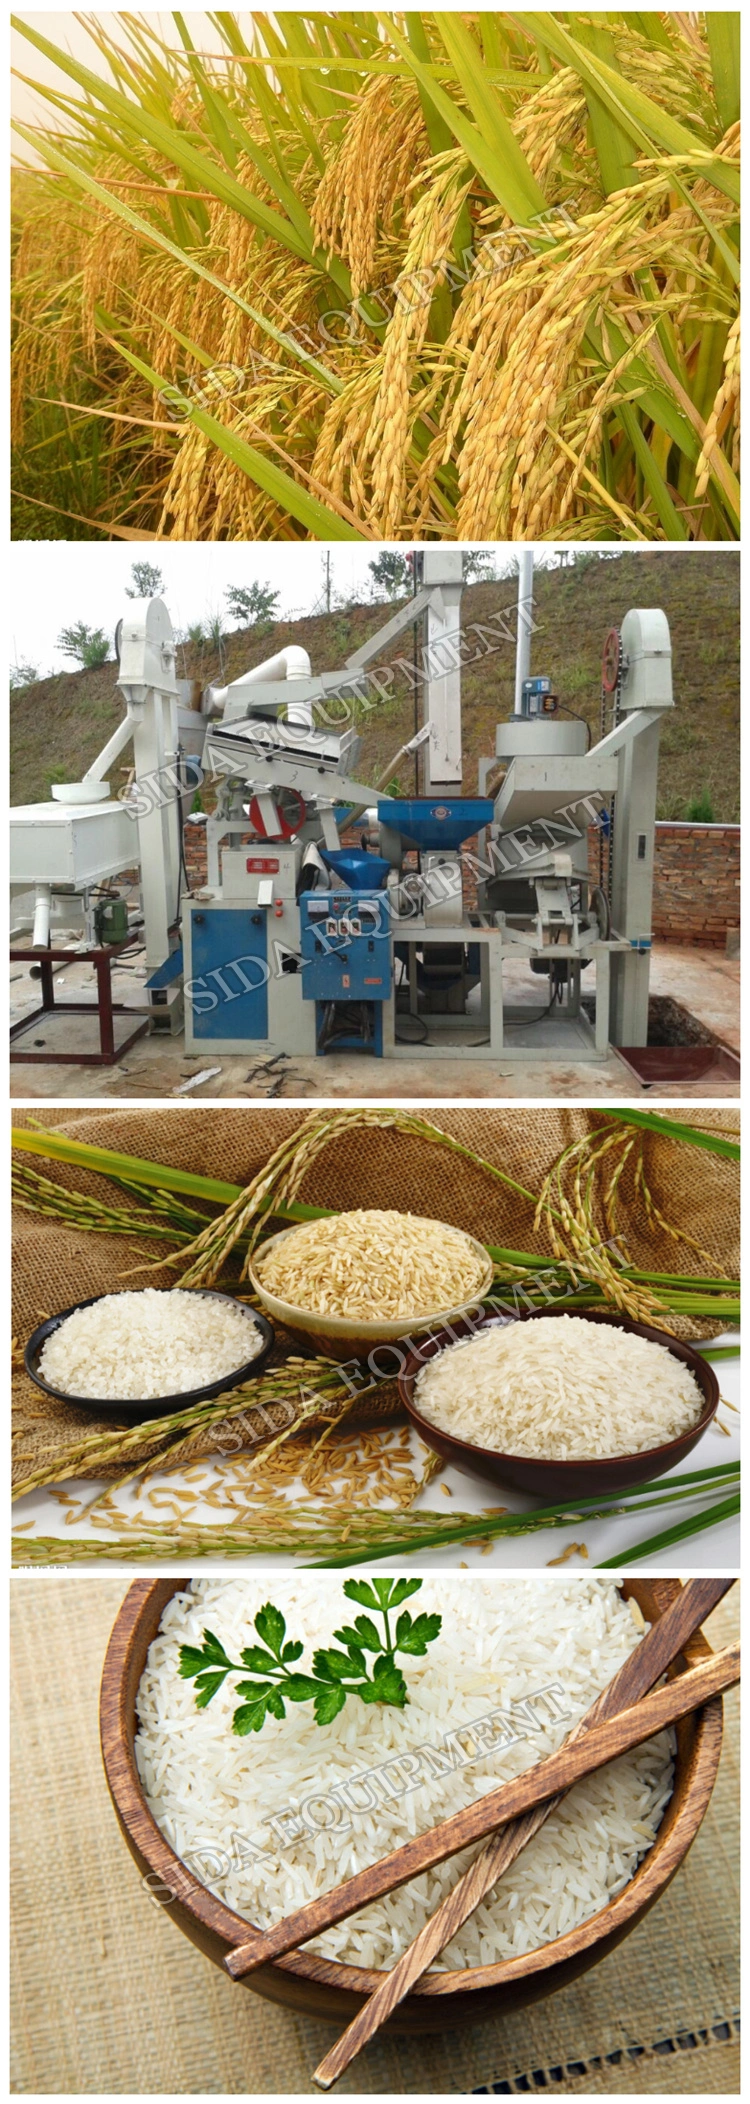 New Condition Completed Paddy Husker Rice Milling Machine